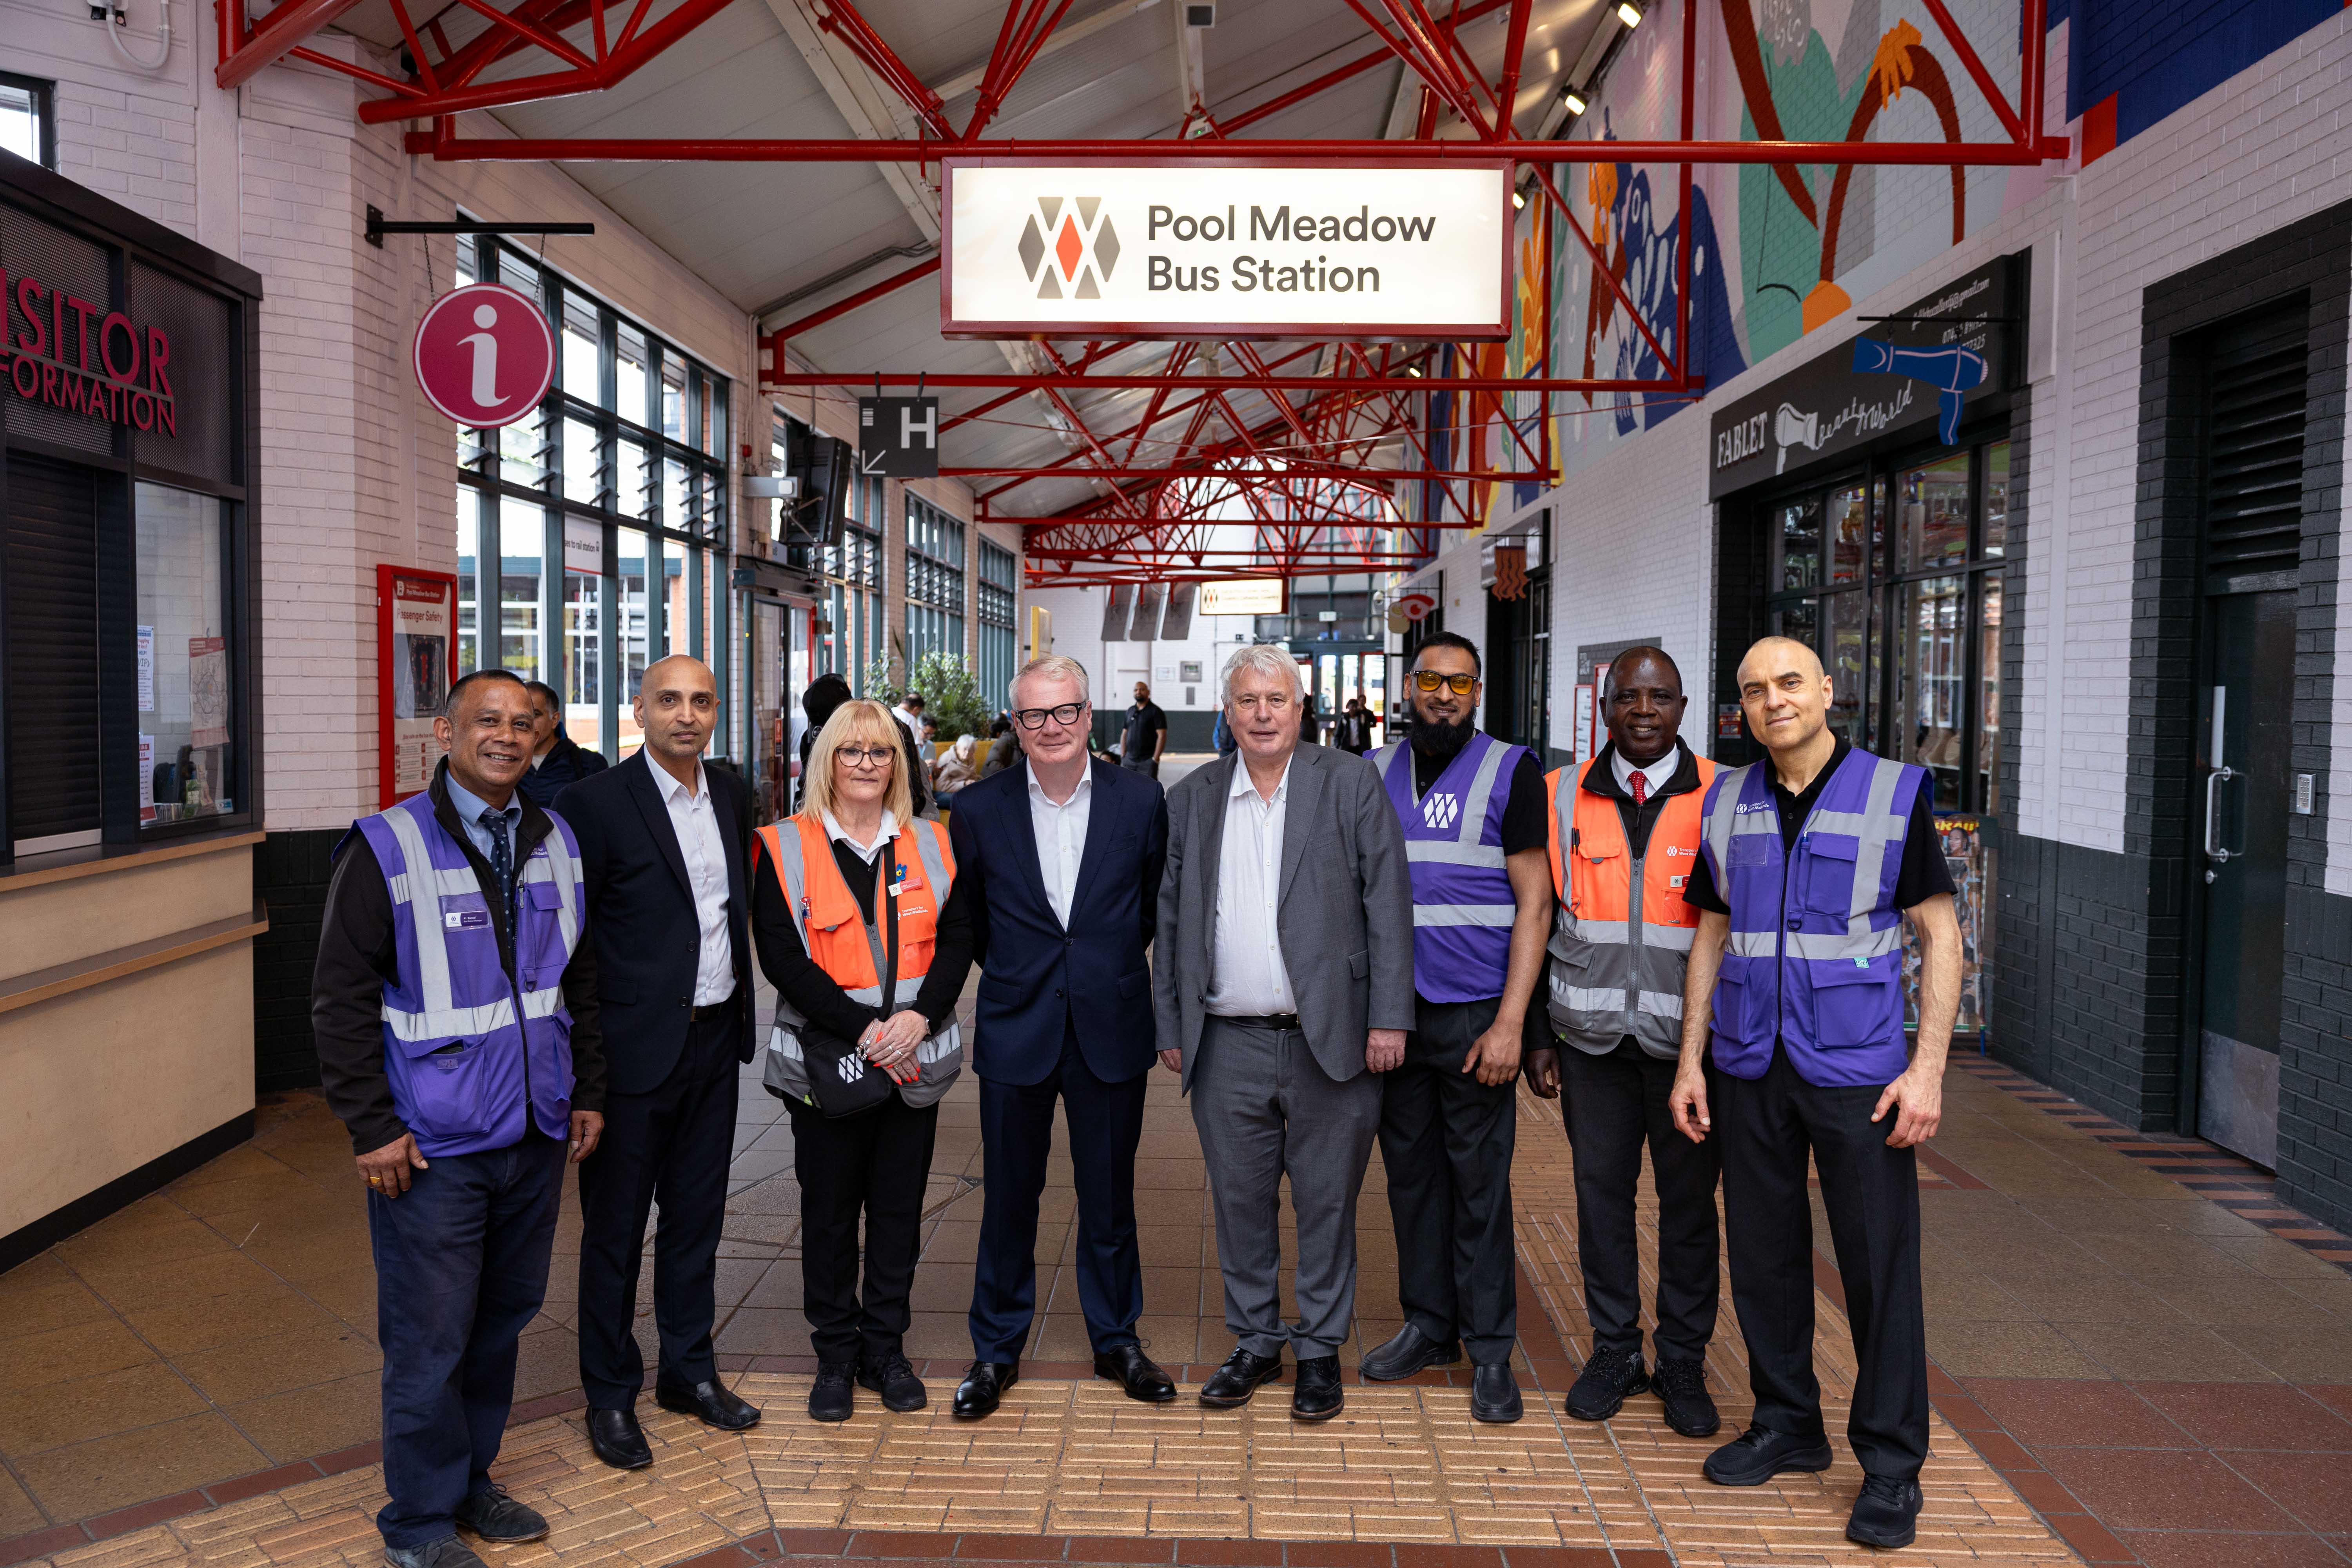 (Left to right) Kulwant Bansal (Bus Station Manager), Zee Kayani (Regional Manager), Sue Hall (Bus Station Supervisor), Richard Parker (Mayor of the West Midlands), Cllr Duggins (Leader Coventry City Council), Ibrar Hussain (Customer Experience Specialist), Dennis Appiah Darkwa (Bus Station Supervisor), Georgiy Nedbaylyuk (Customer Experience Specialist)